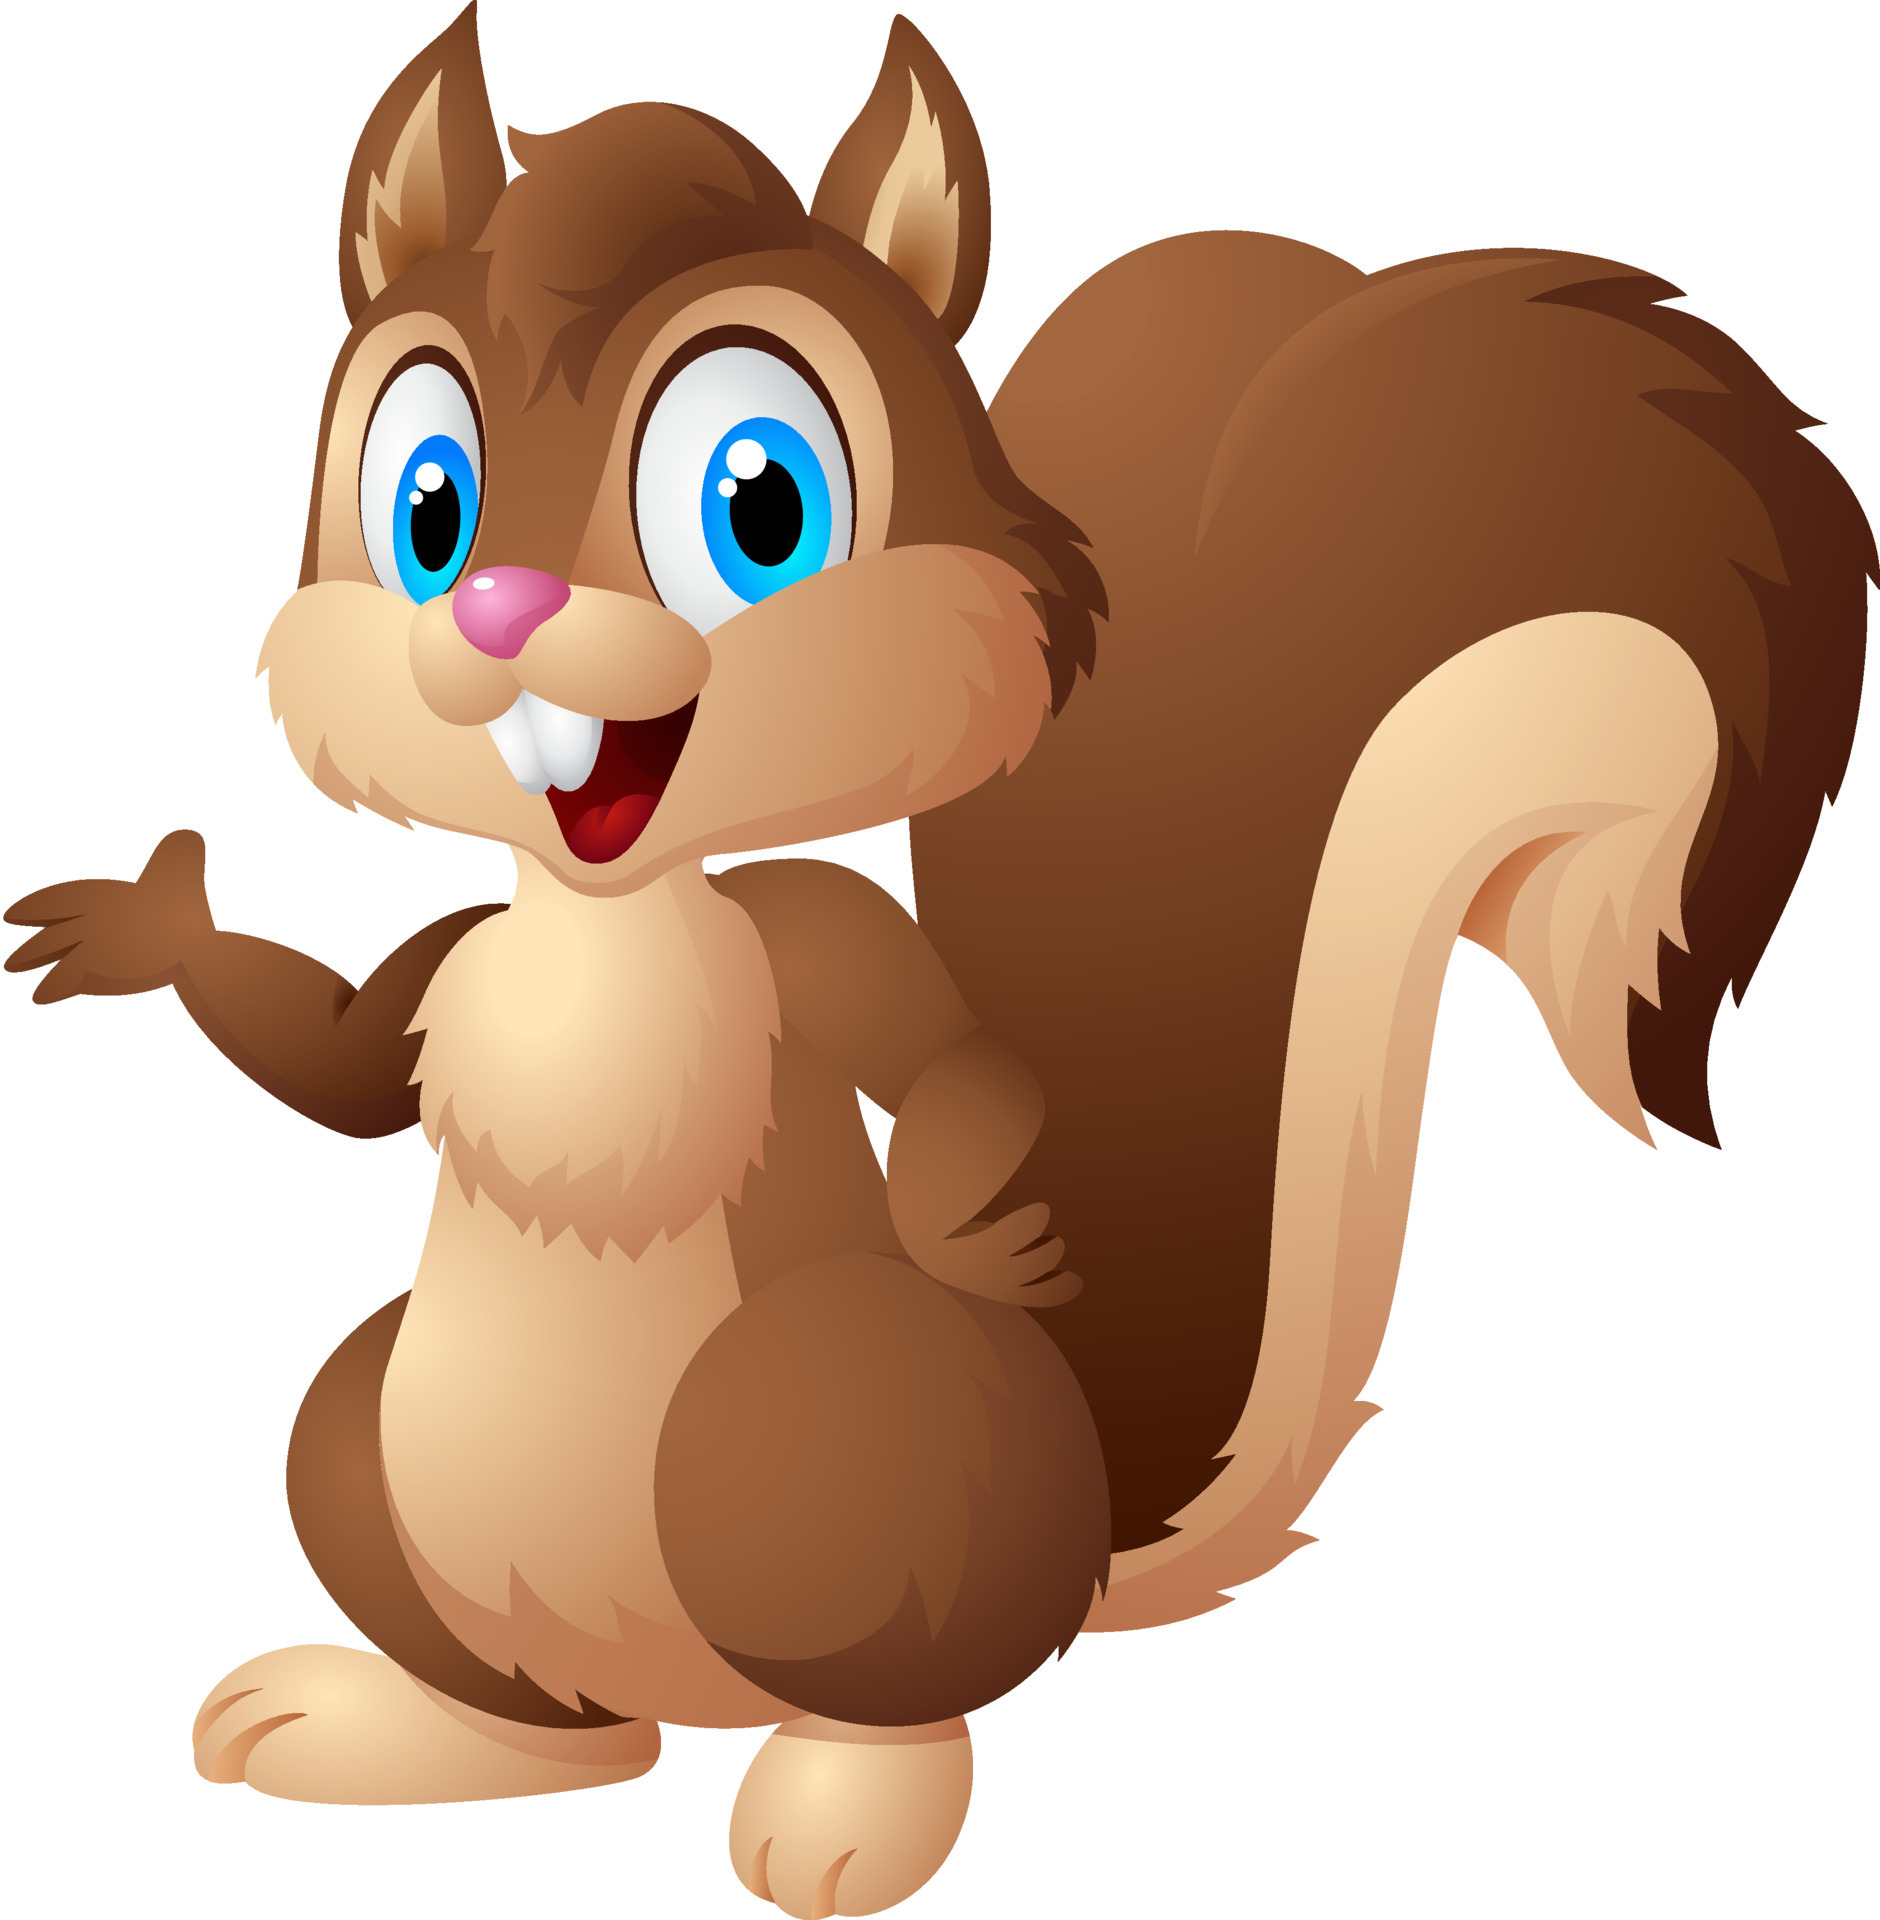 Squirrel Cartoon Vector Art, Icons, and Graphics for Free Download